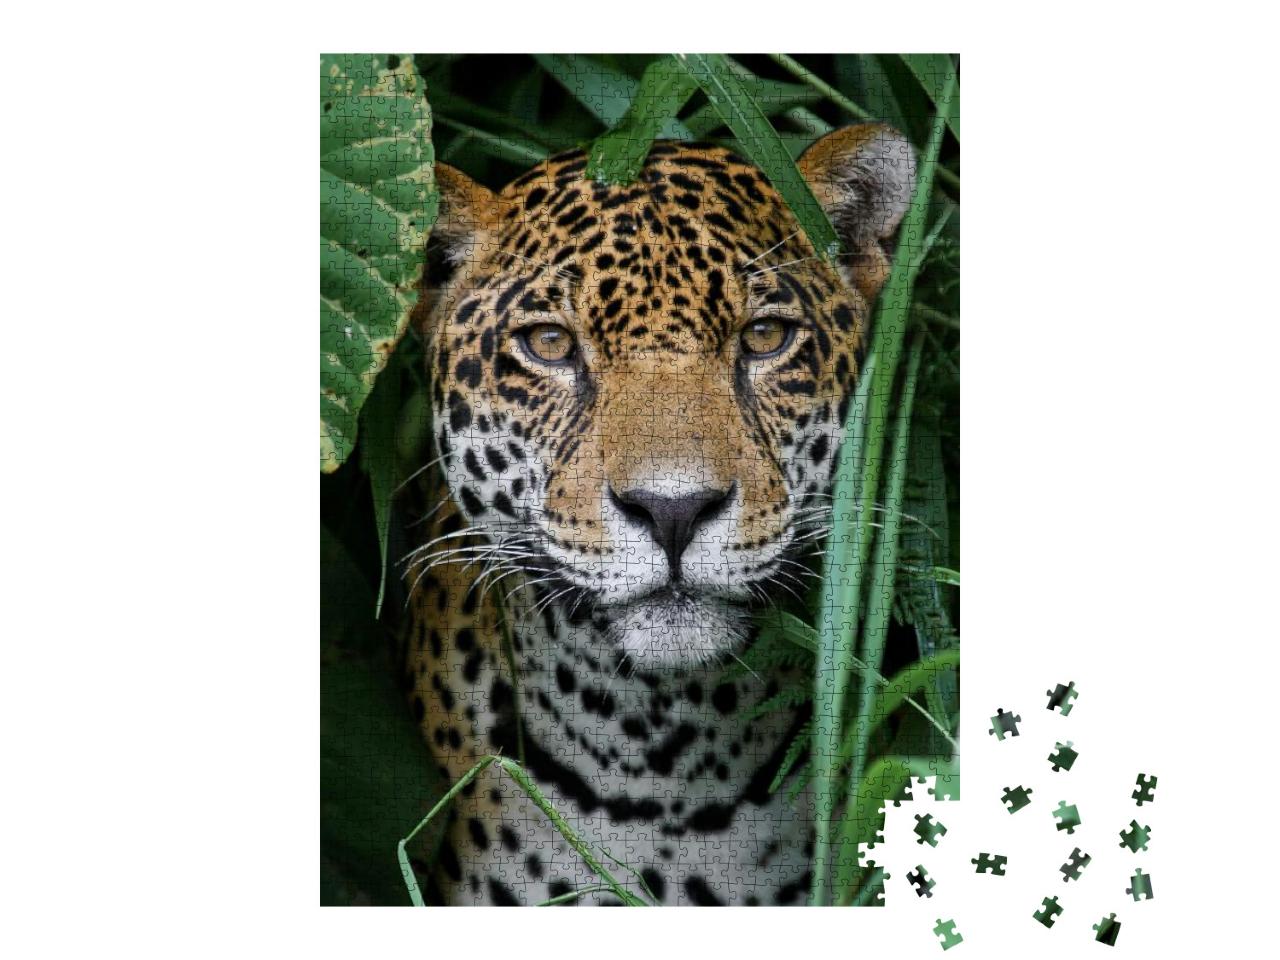 Jaguar in the Amazon Jungle... Jigsaw Puzzle with 1000 pieces